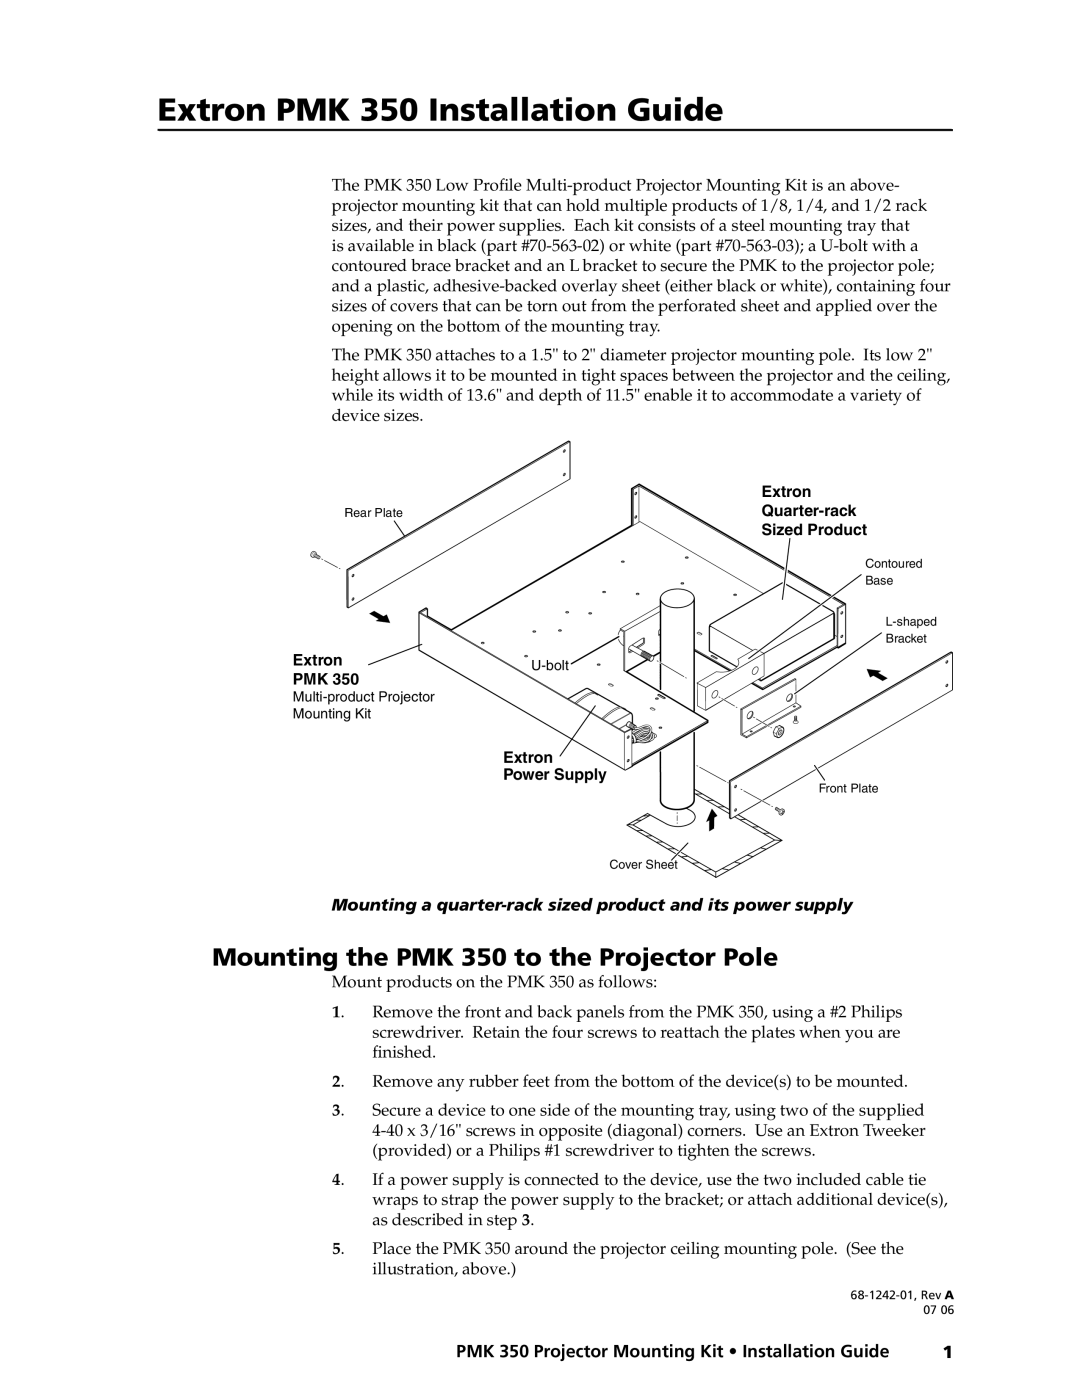 Extron electronic manual Preliminary, Mounting the PMK 350 to the Projector Pole, Extron PMK 350 Installation Guide 